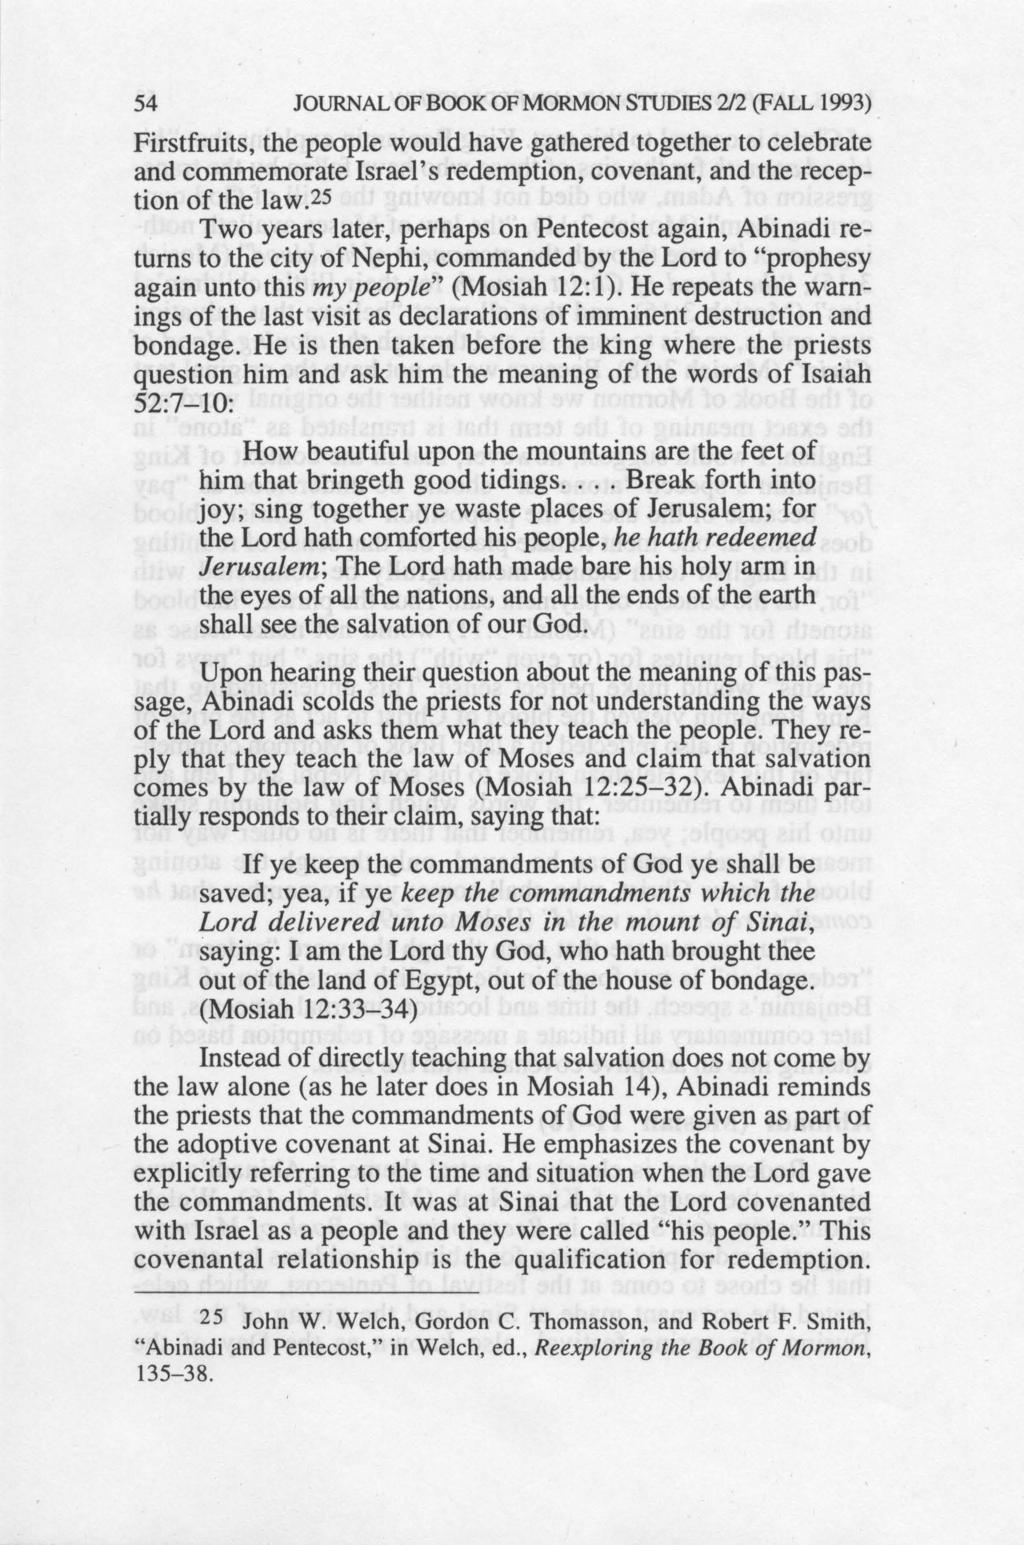 54 JOURNAL OF BOOK OF MORMON STUDIES 'lj2 (FALL 1993) Firstfruits, the people would have gathered together to celebrate and commemorate Israel's redemption, covenant, and the reception of the law.